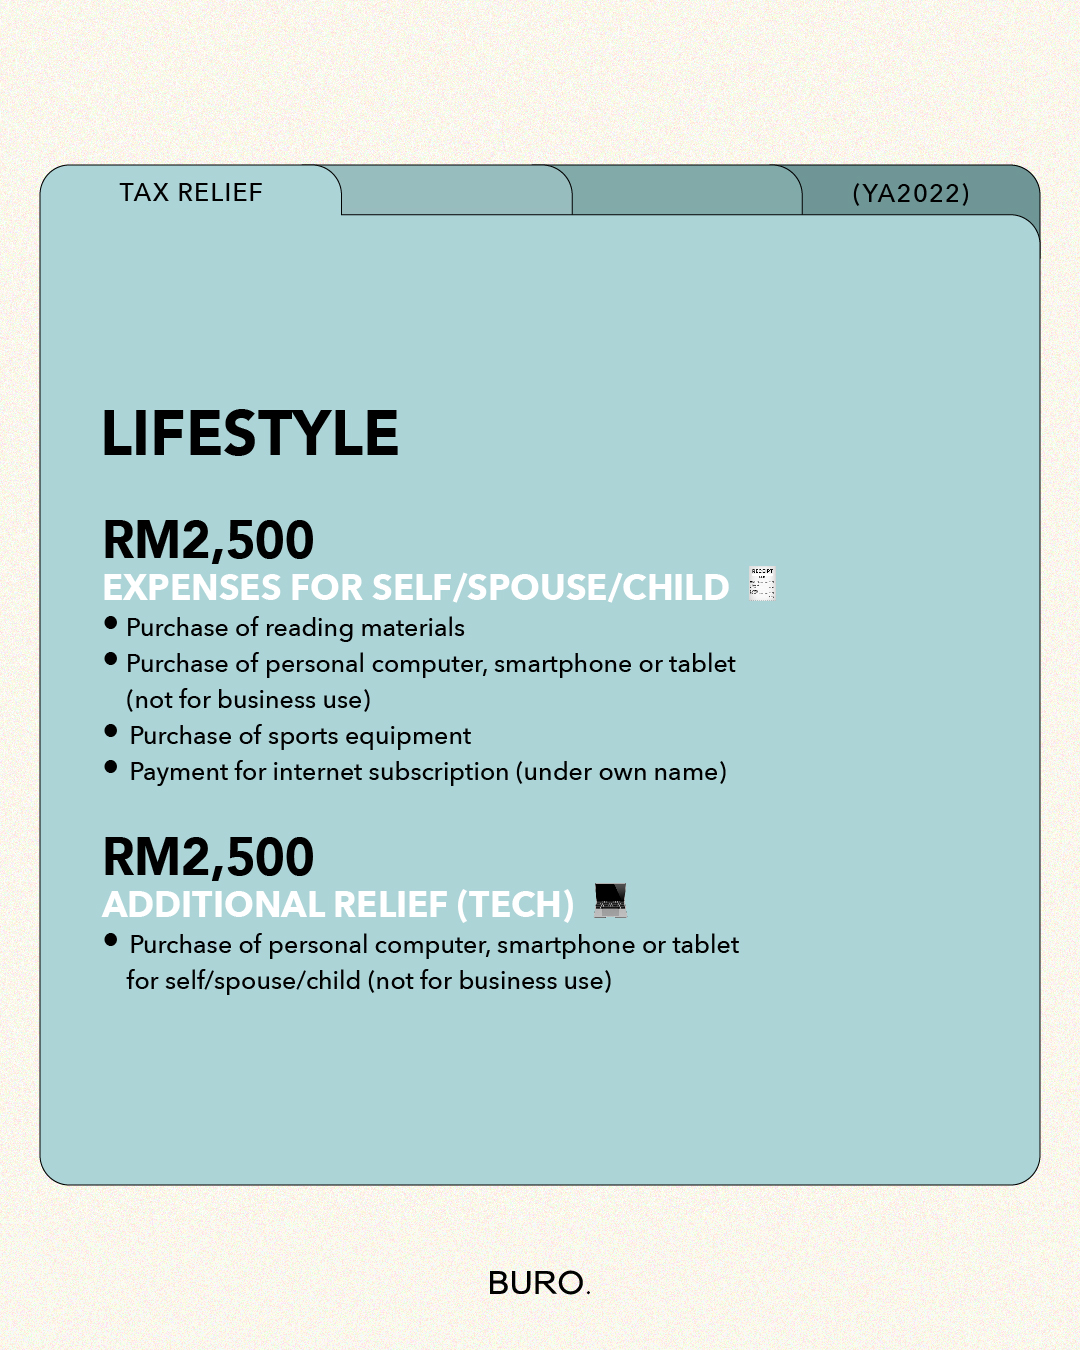 Malaysia tax Here are the tax reliefs to claim for YA 2022